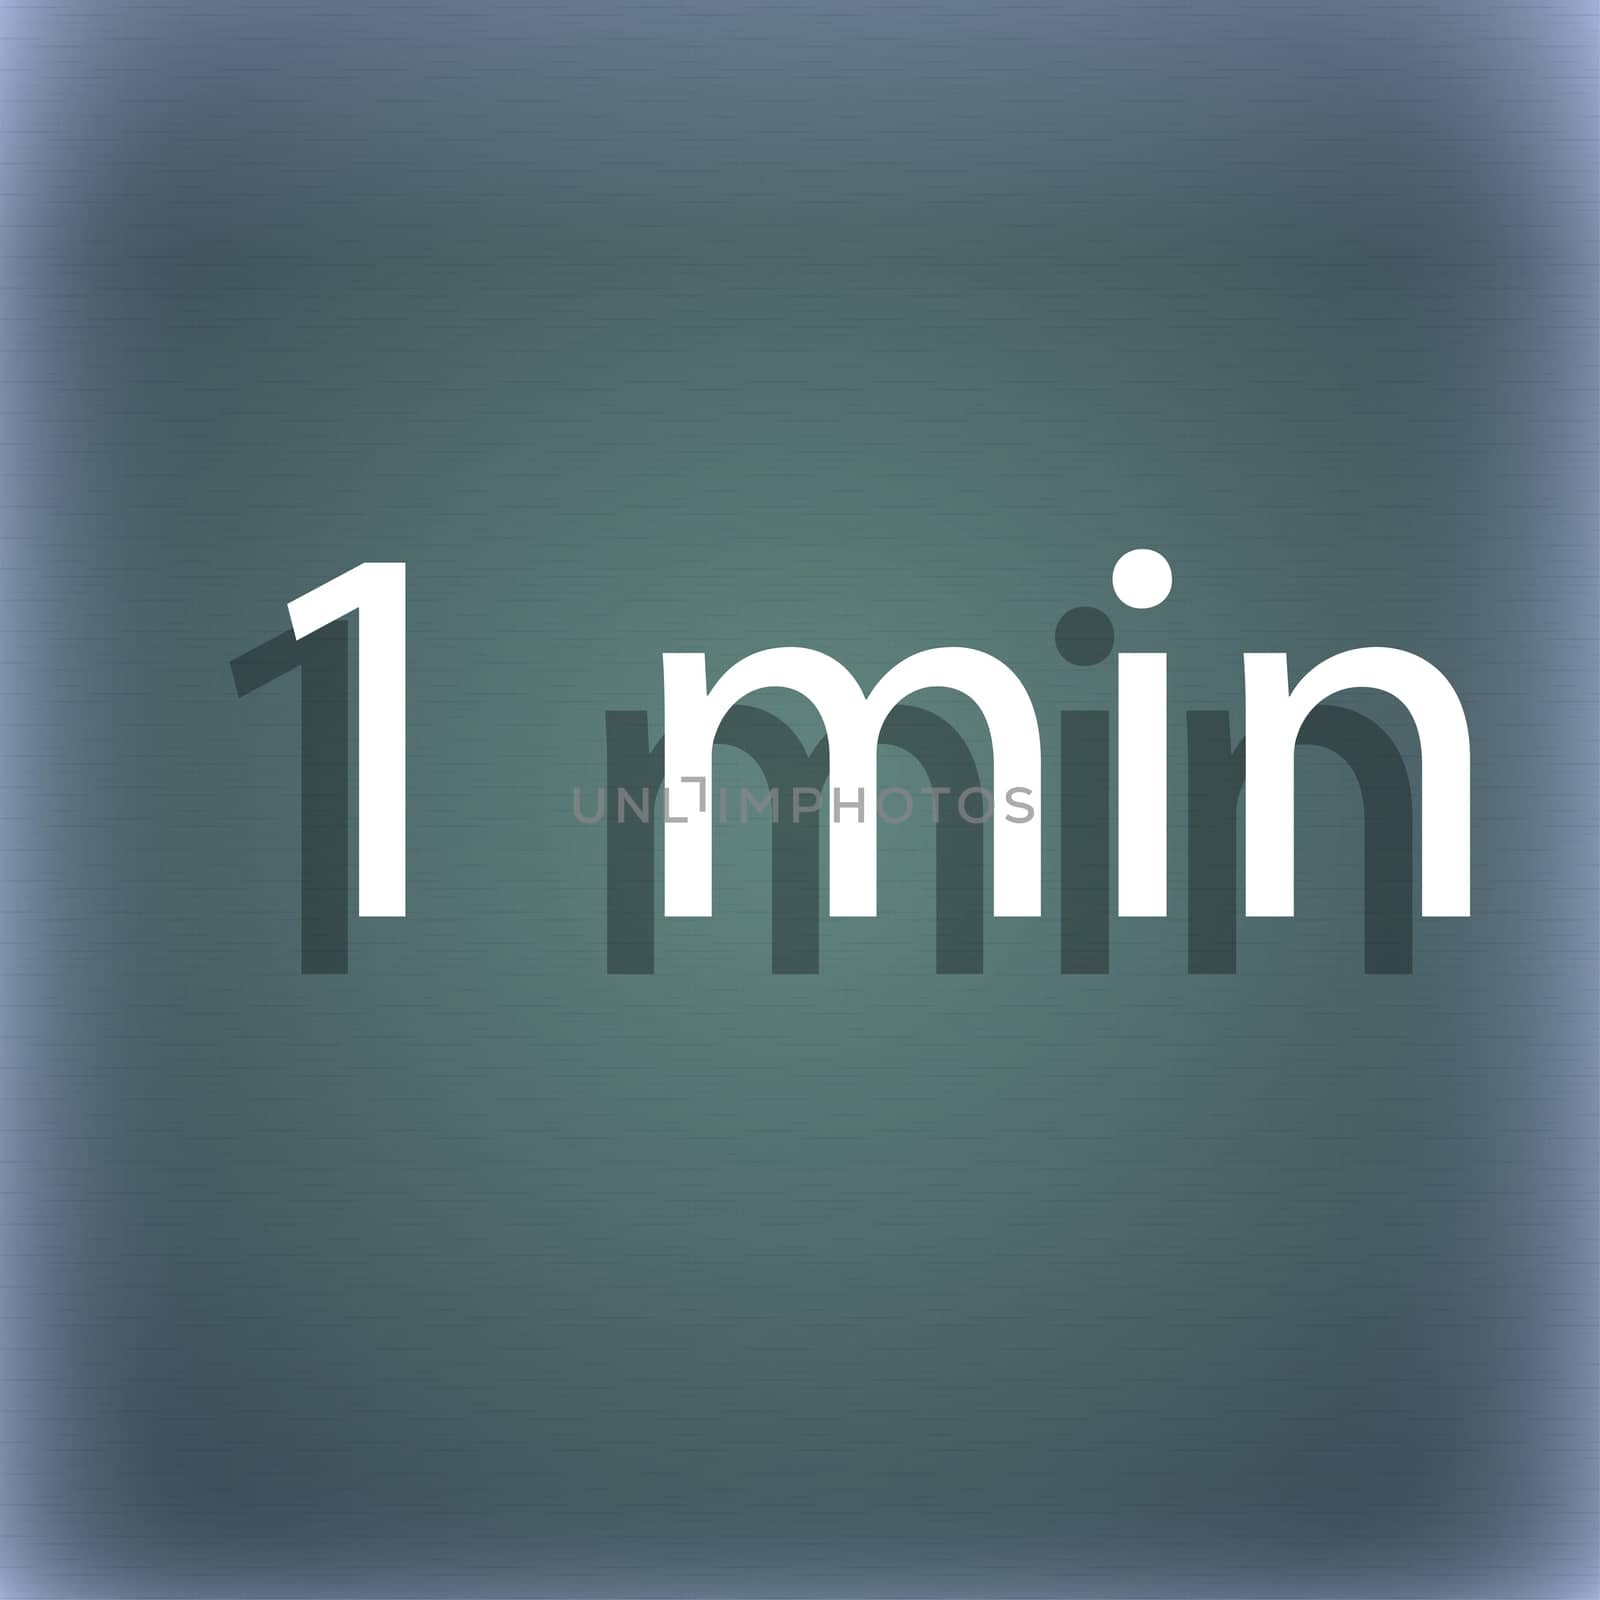 One minutes sign icon. On the blue-green abstract background with shadow and space for your text.  by serhii_lohvyniuk